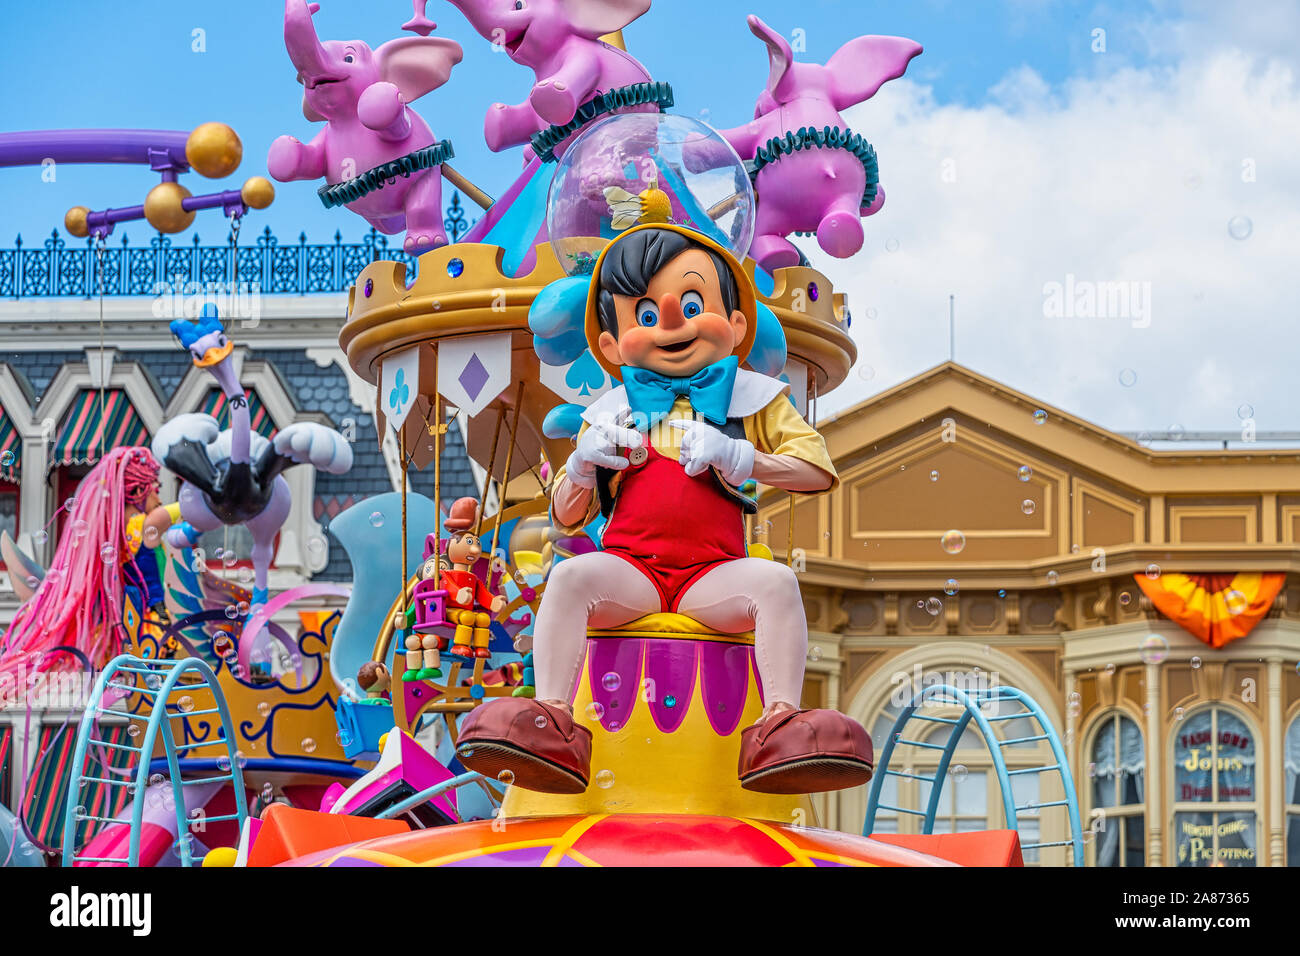 Pinocchio character from the Festival of Fantasy Parade at the Magic Kingdom Stock Photo